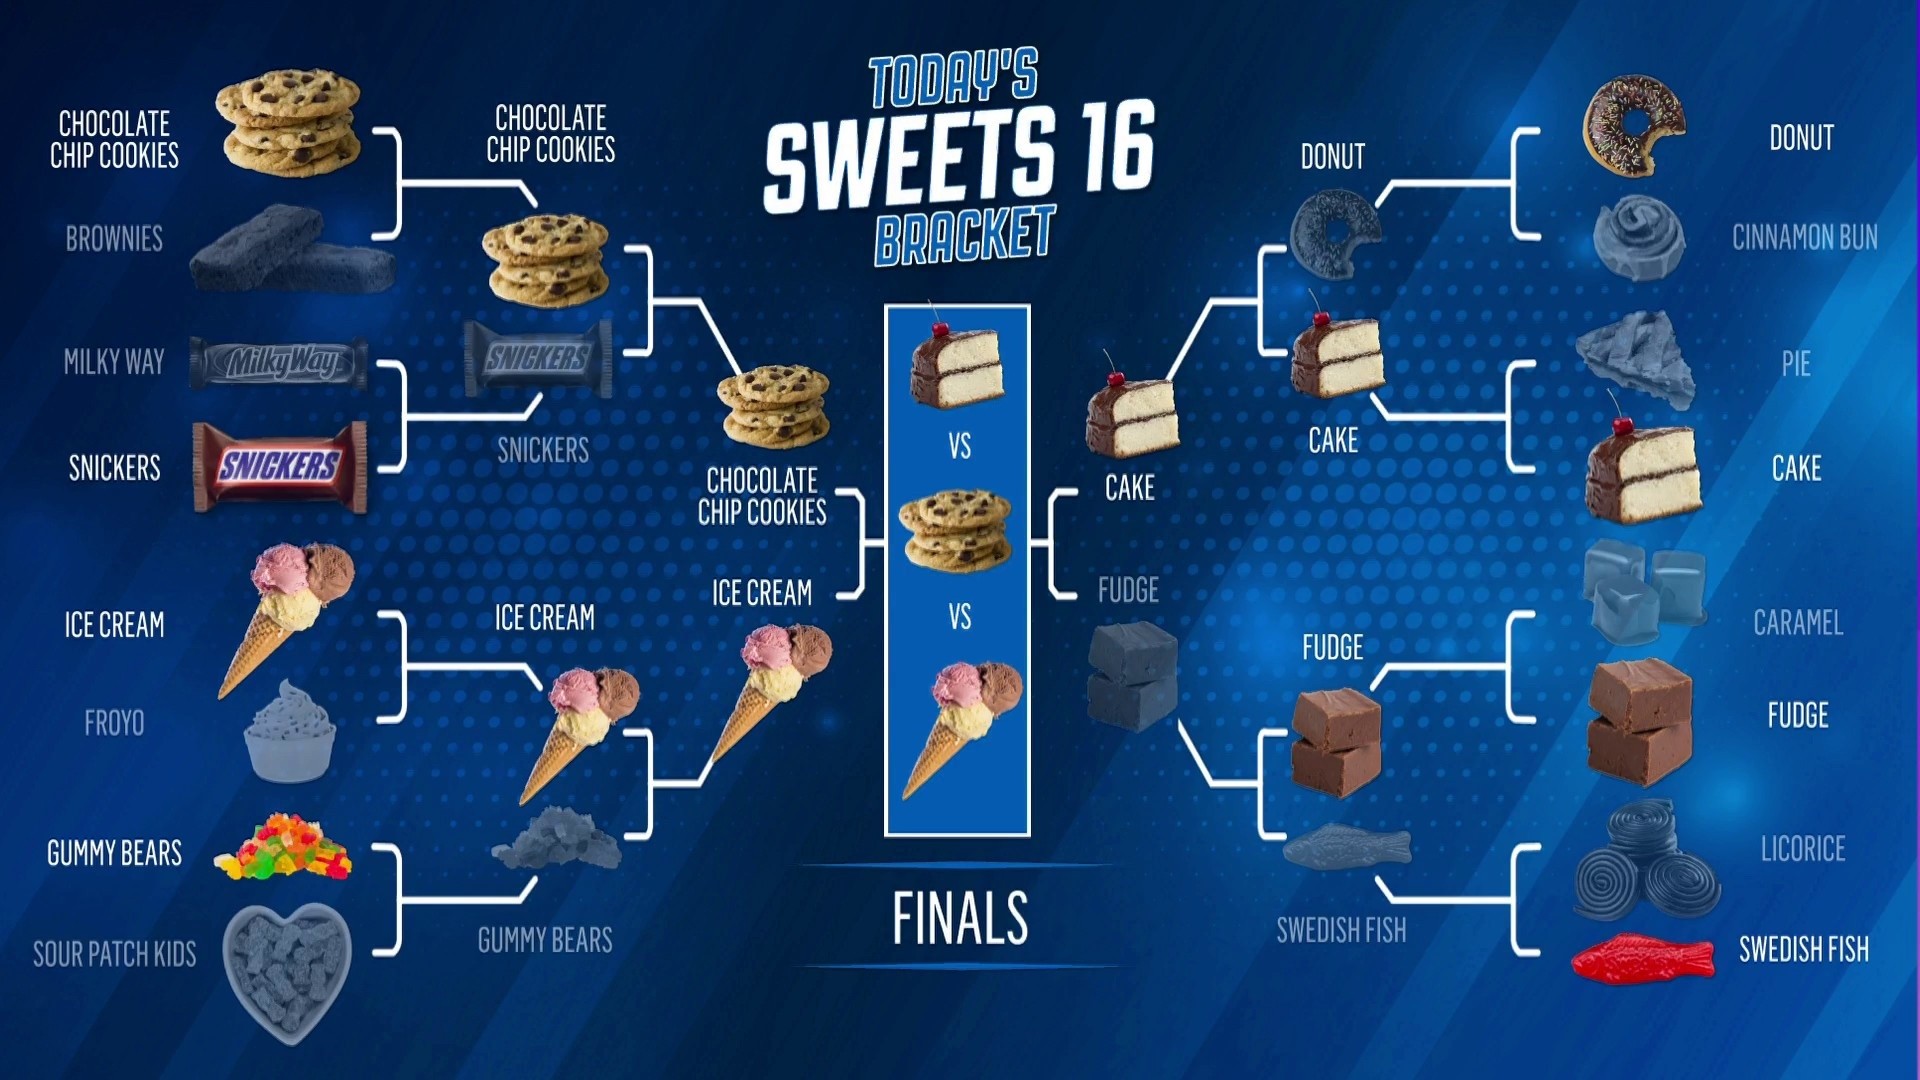 See which treat won the 3-way final in TODAY’s ‘Sweets 16’